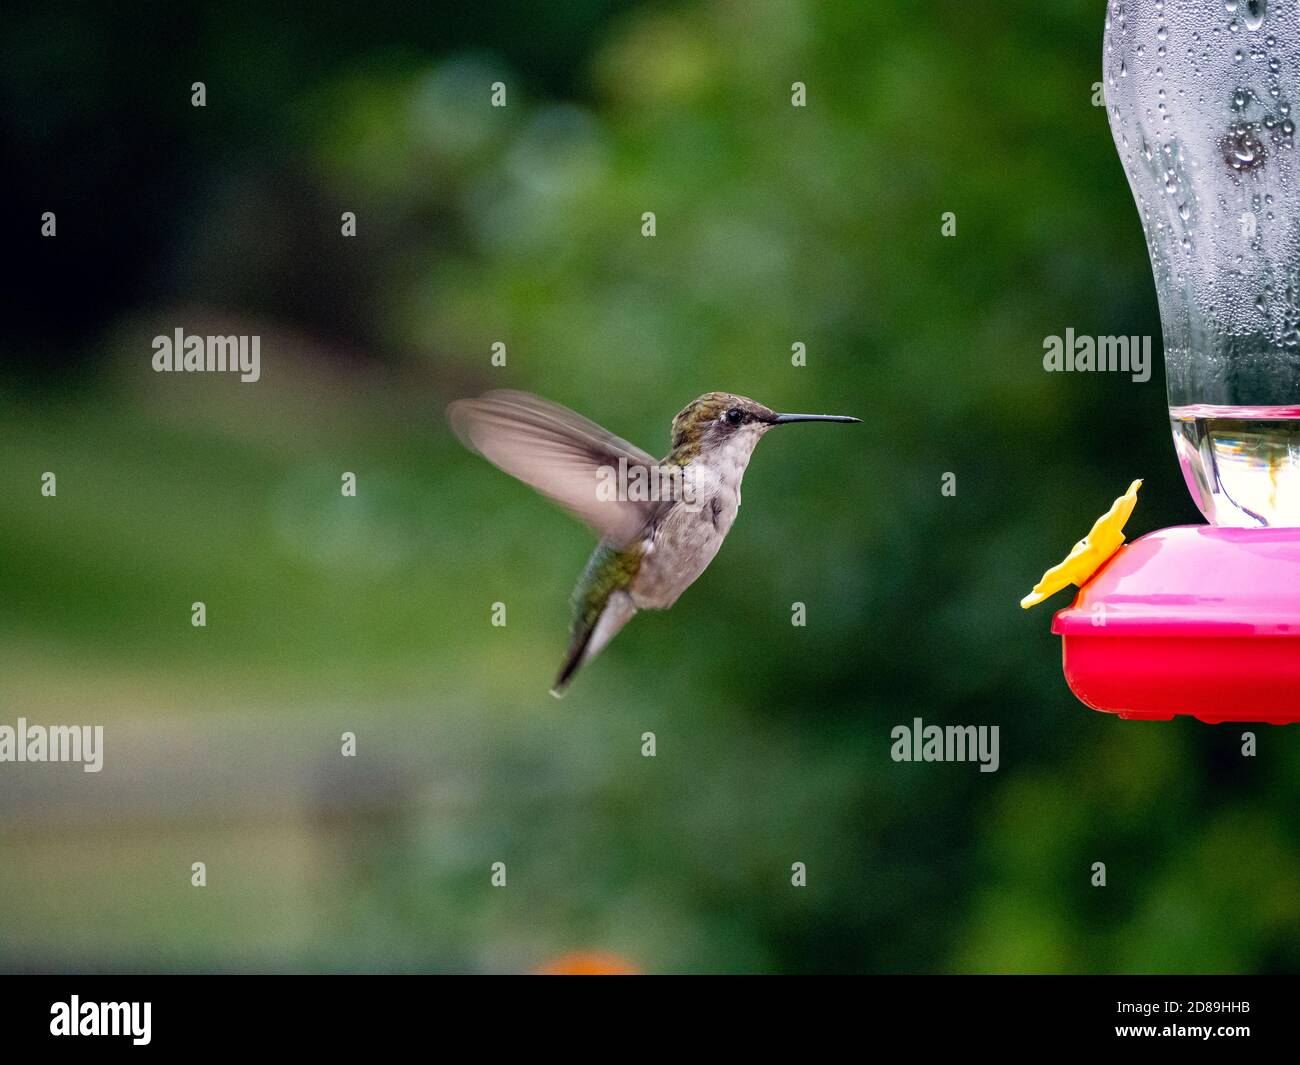 Ruby-Throated Hummingbird hovering by a bird feeder, USA Stock Photo